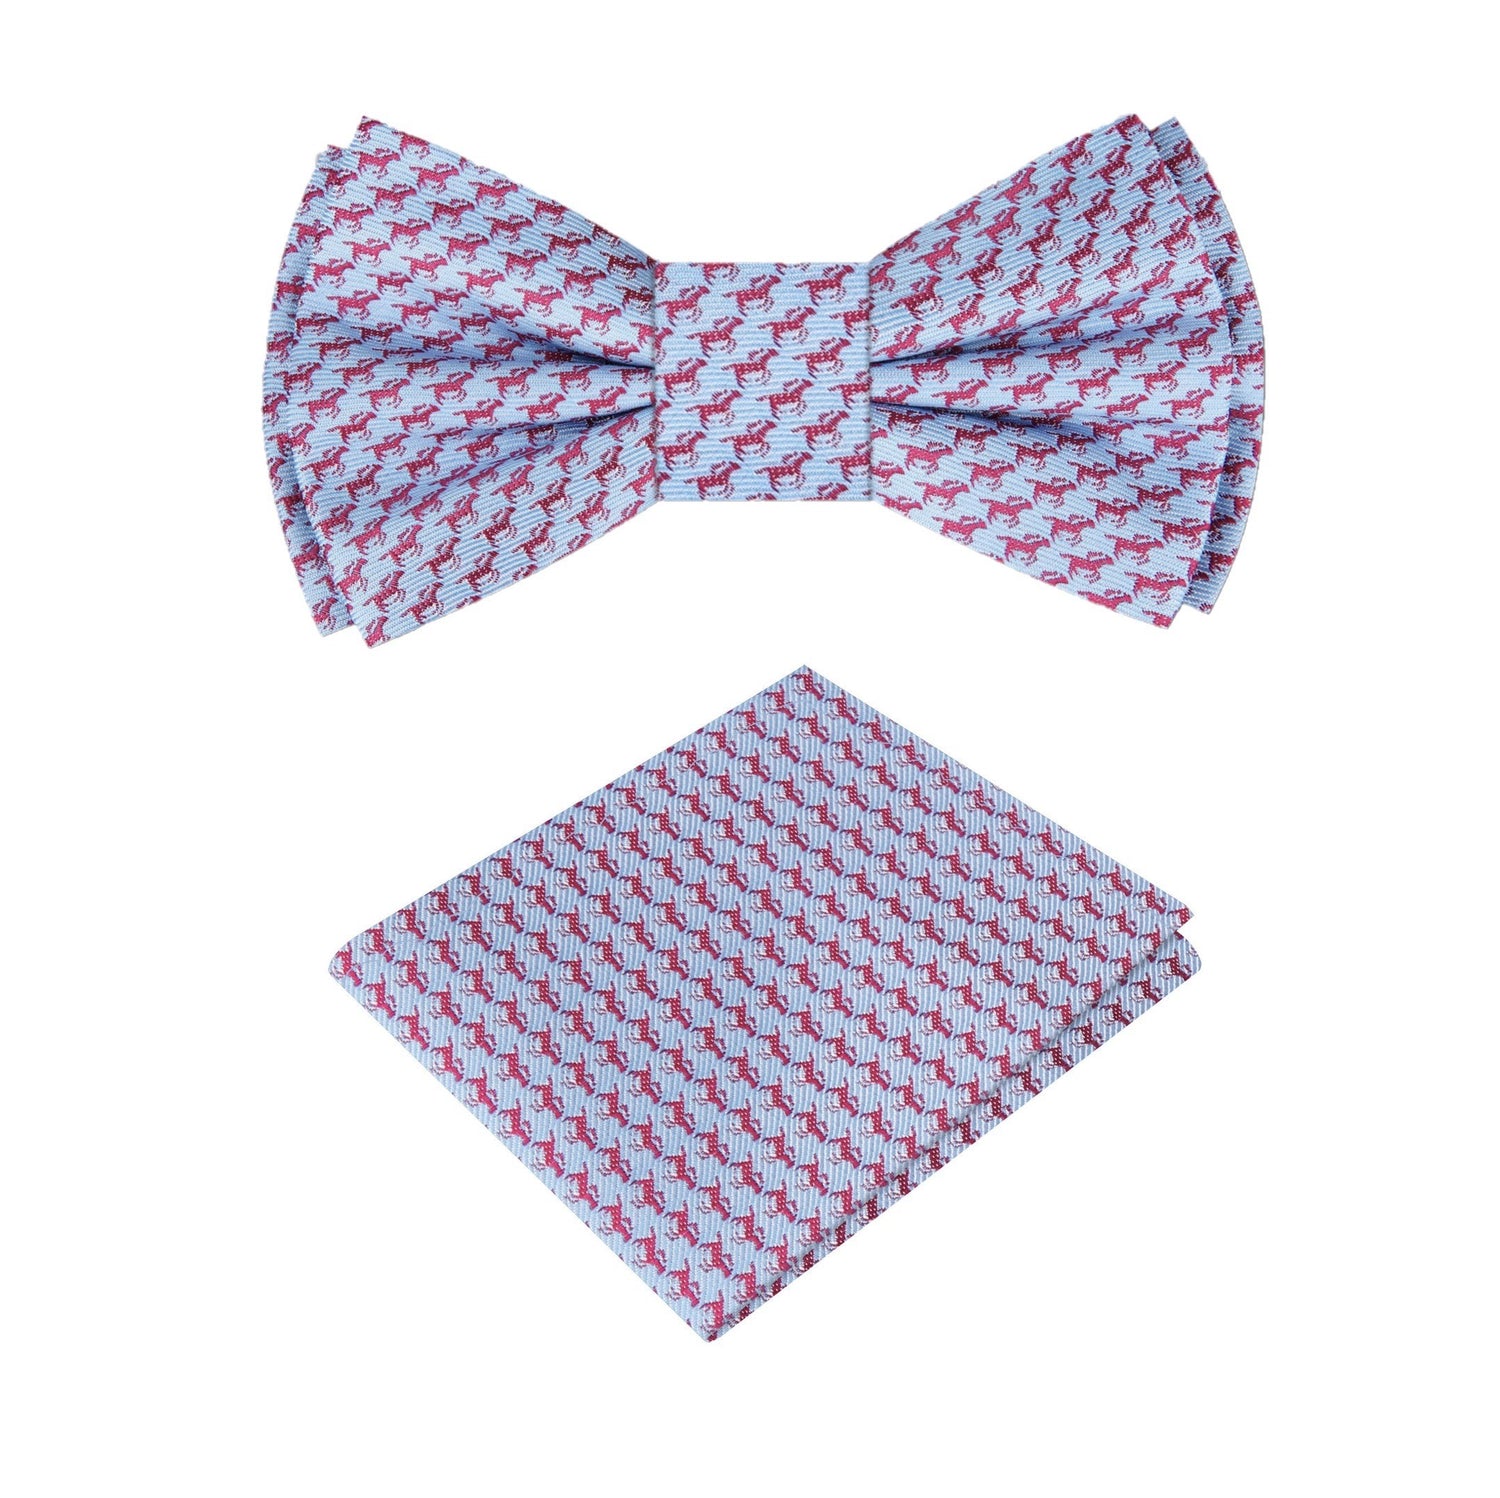 Light Blue and Red Race Horses Bow Tie and Pocket Square